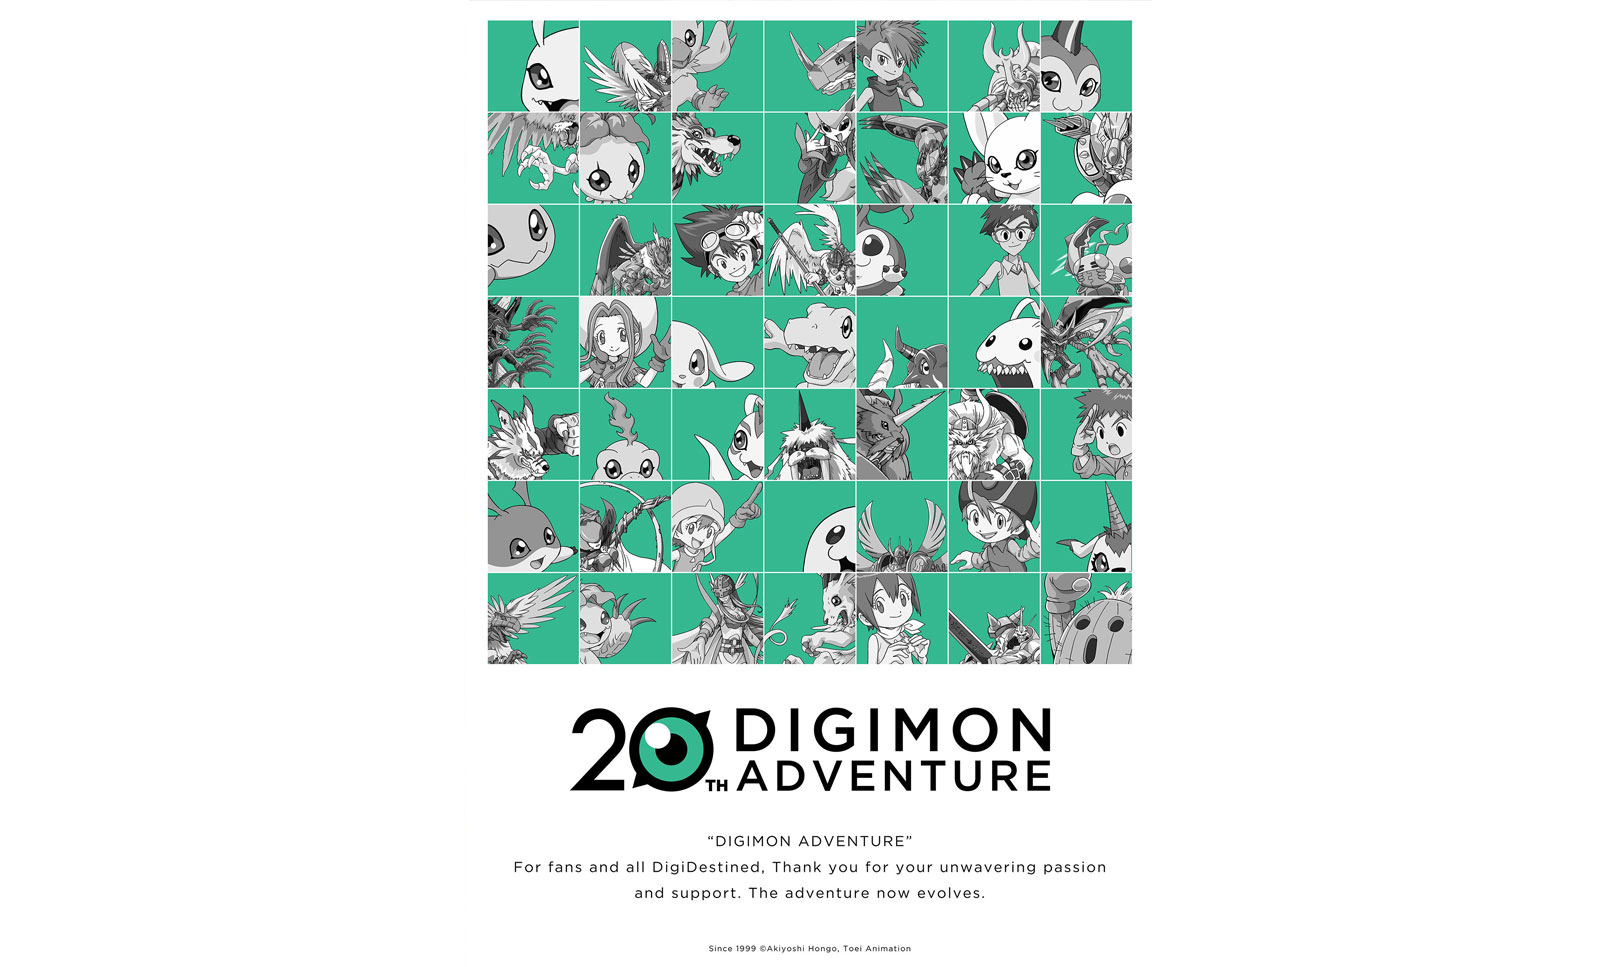 20th ANNIVERSARY DIGIMON ADVENTURE FILM REVEALS NEW VISUAL AND TEASER TRAILER